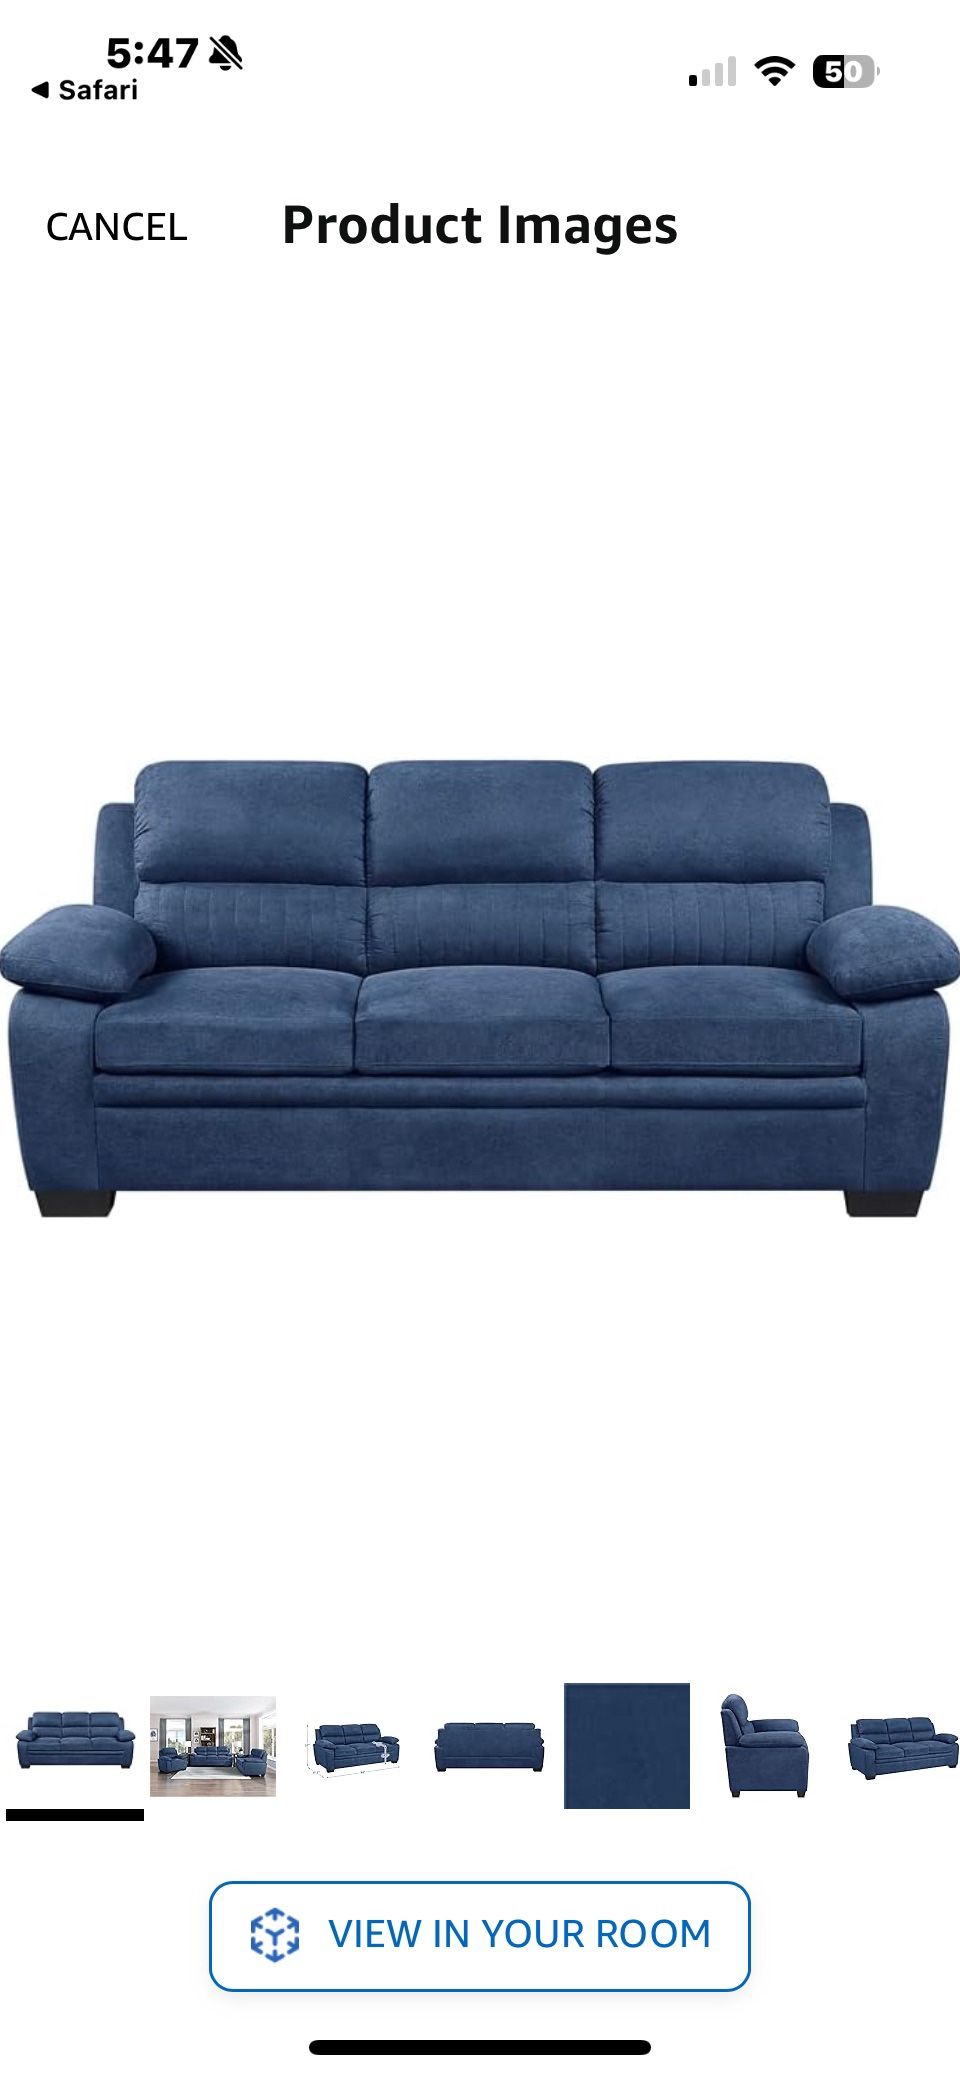 Brand New Lexicon Holleman Fabric Upholstered Sofa In Blue Color 